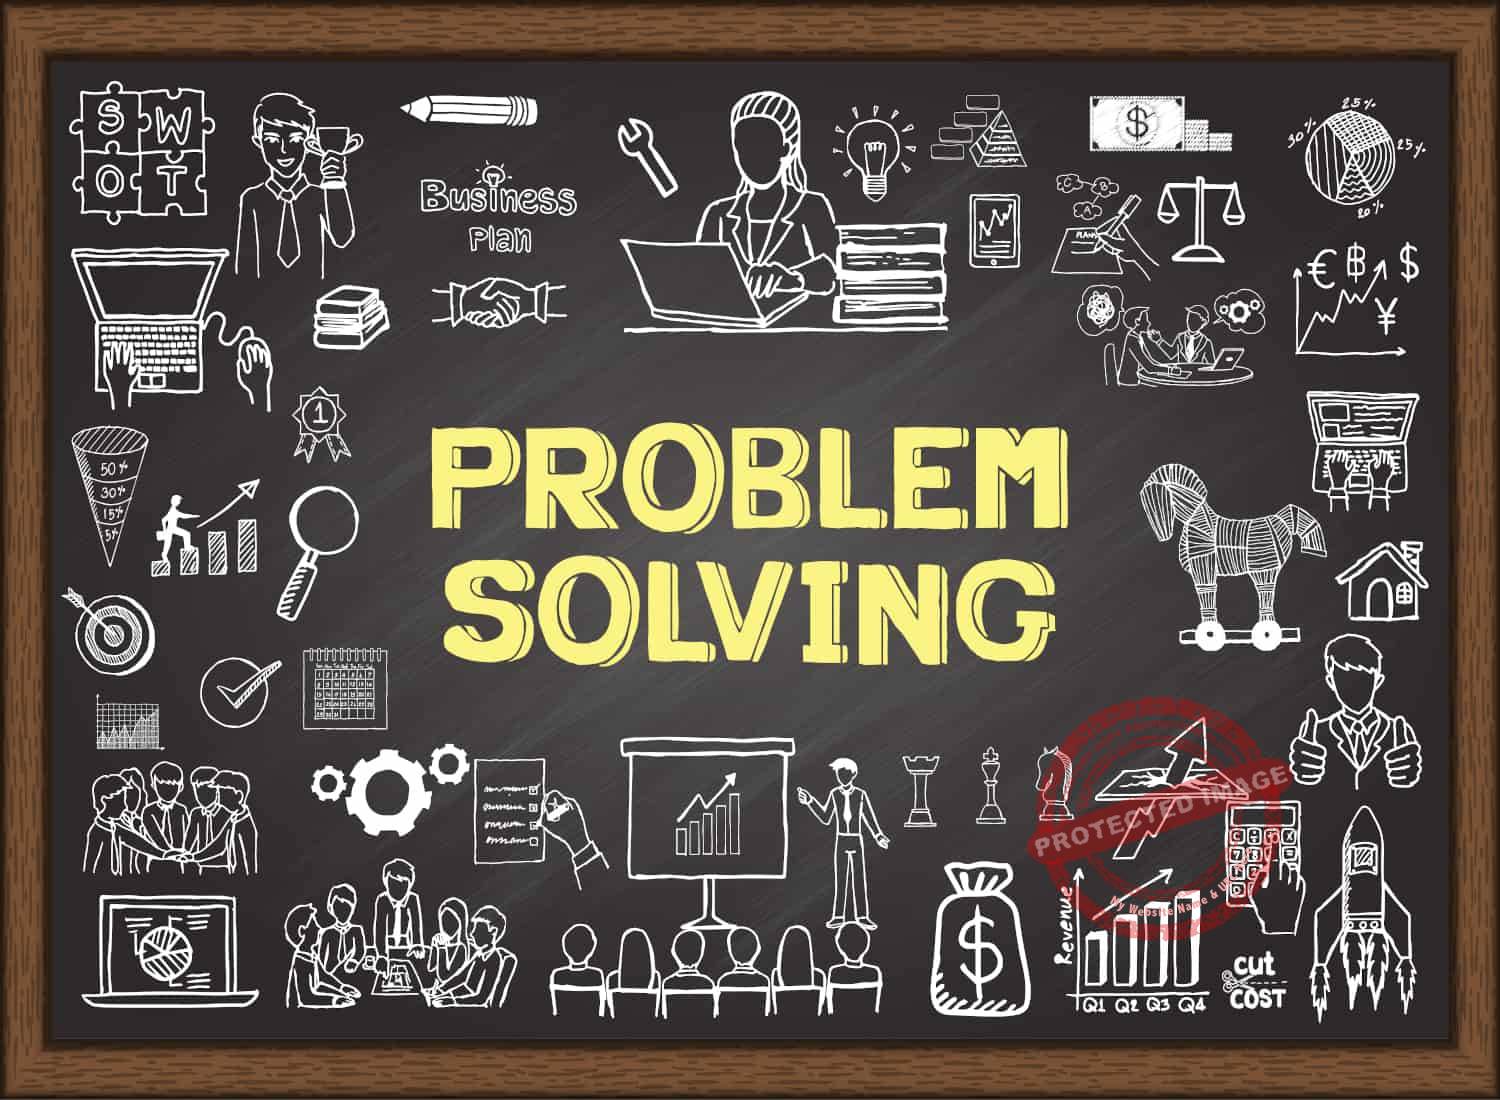 business ideas based on problems to solve